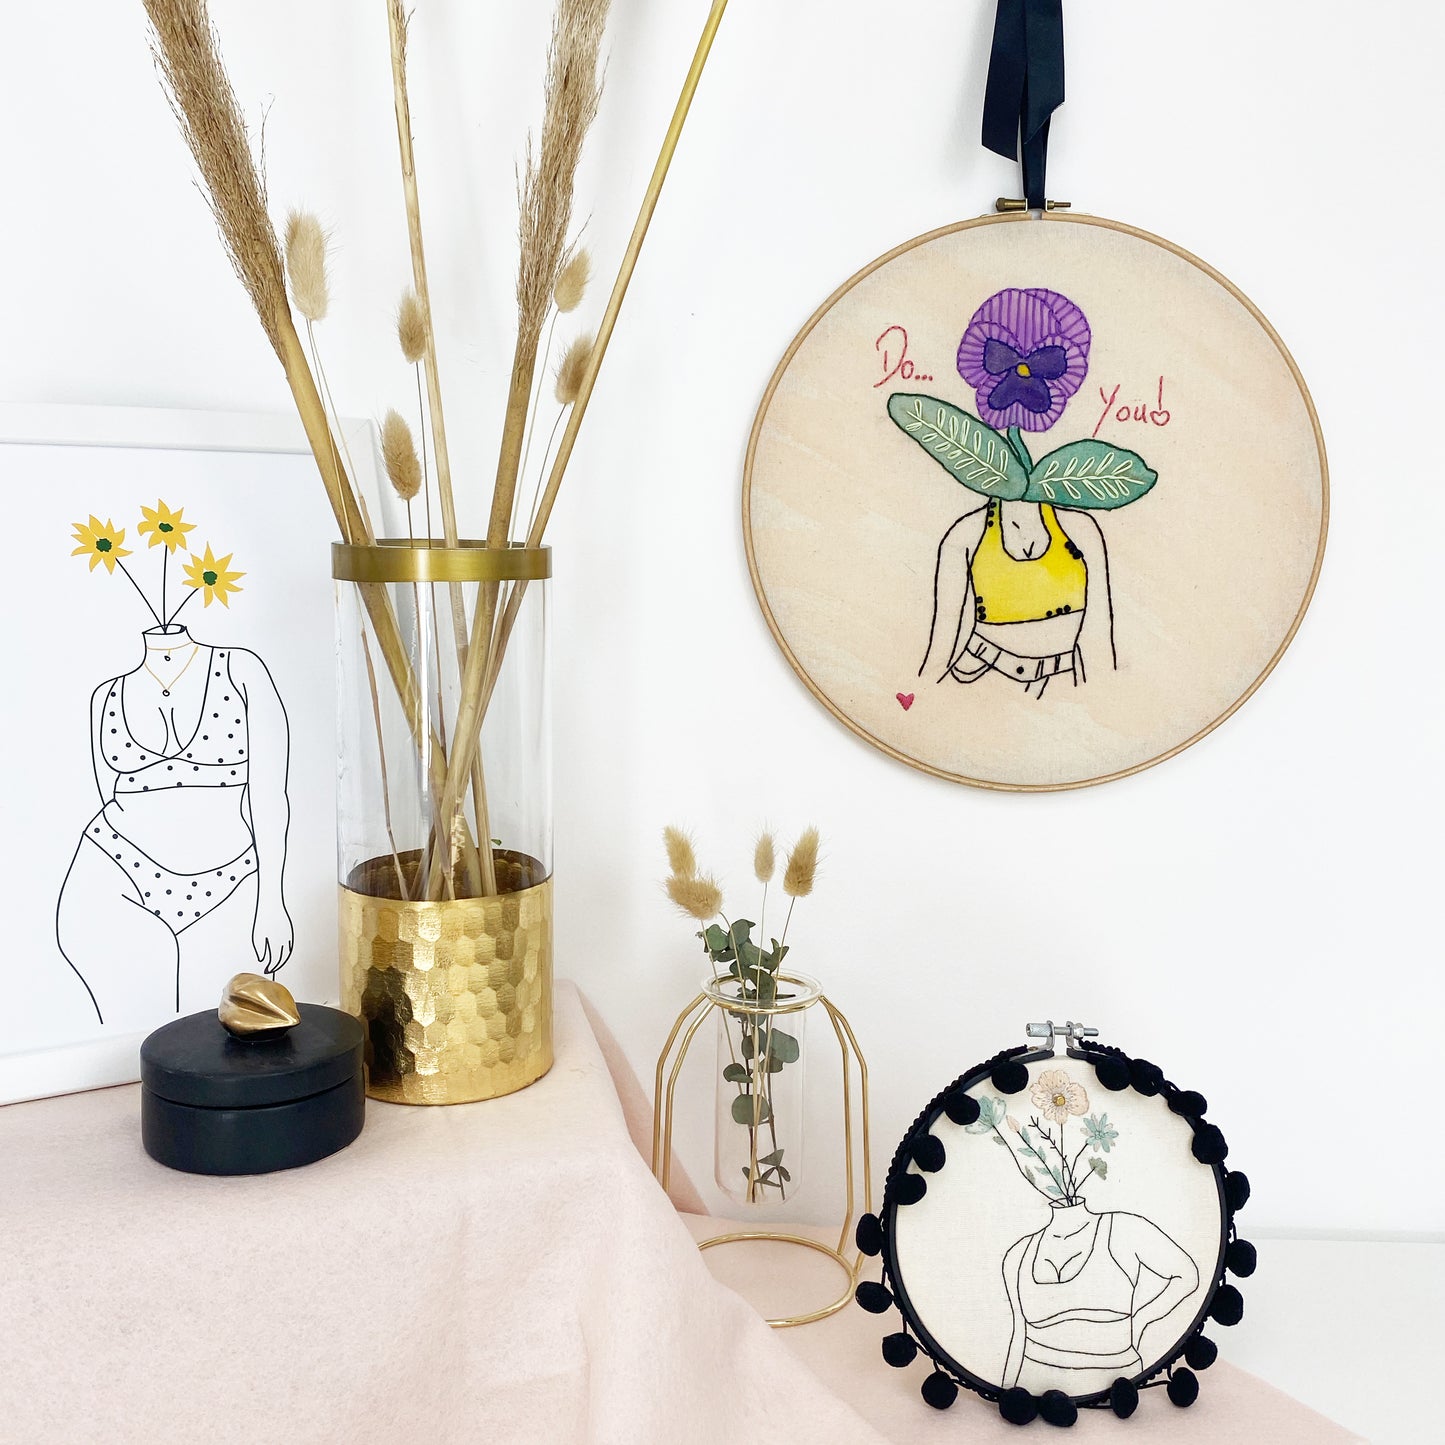 Do You! 💗 Embroidery Hoop Art kit